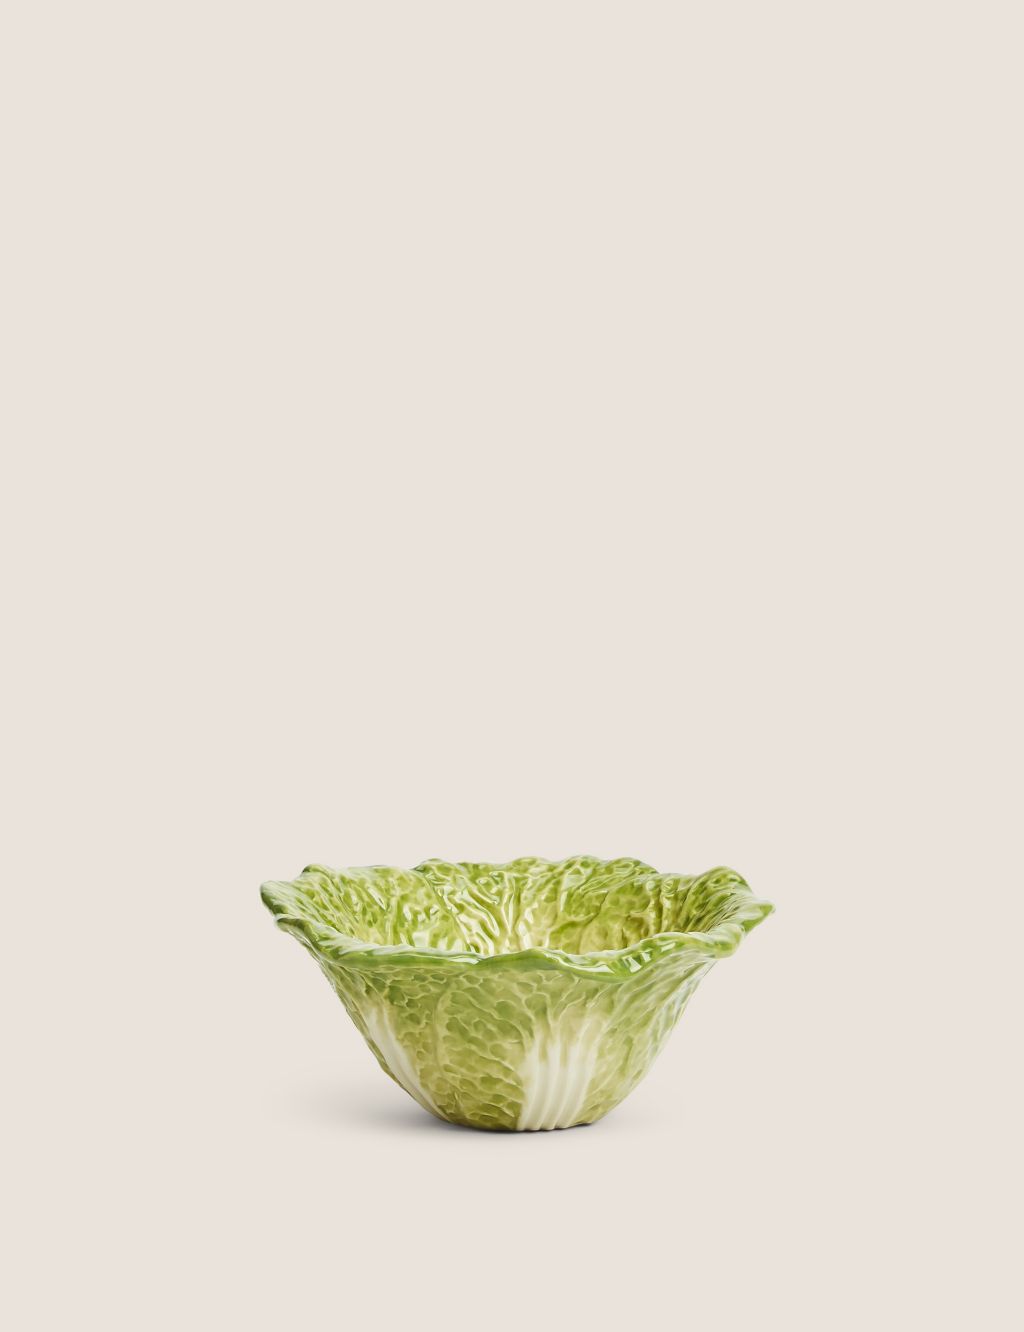 Cabbage Nibble Bowl image 1